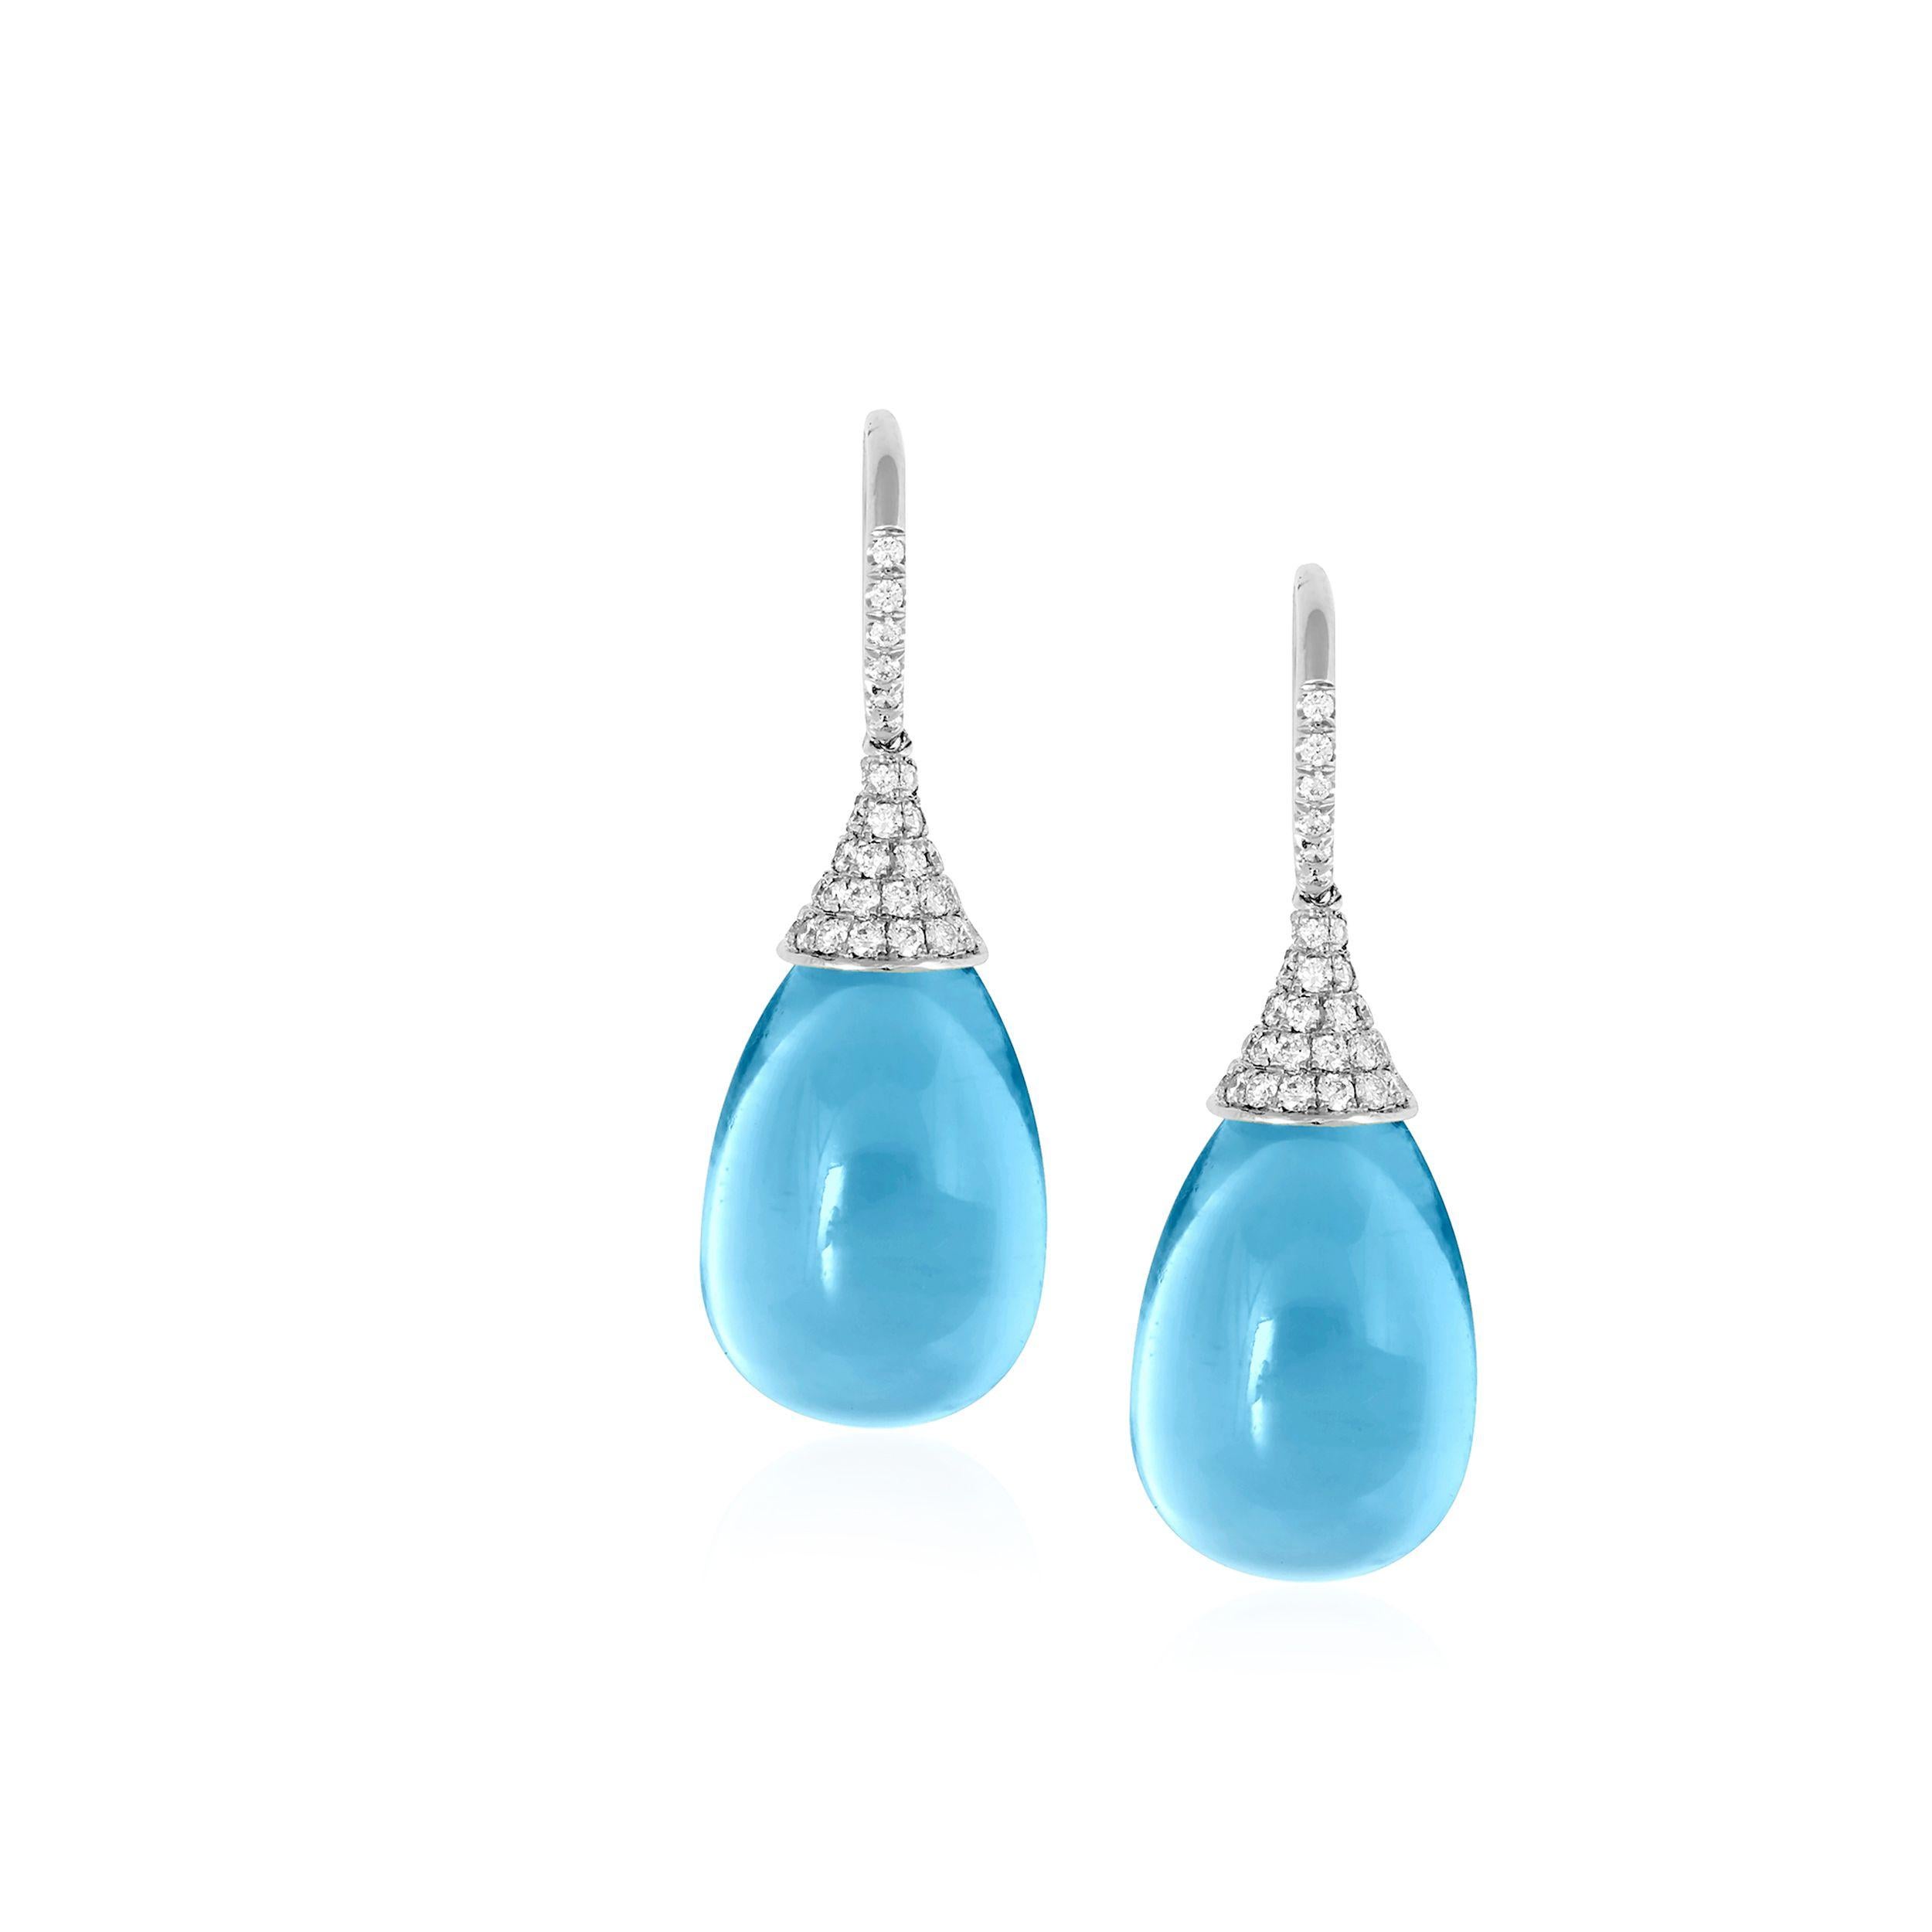 These Blue Topaz Drops Earrings with Diamonds cap in 18K White Gold, from the 'Naughty' Collection, are a stunning piece of jewelry designed for the fashion-forward and daring individual. The earrings feature blue topaz drops, held in place by a